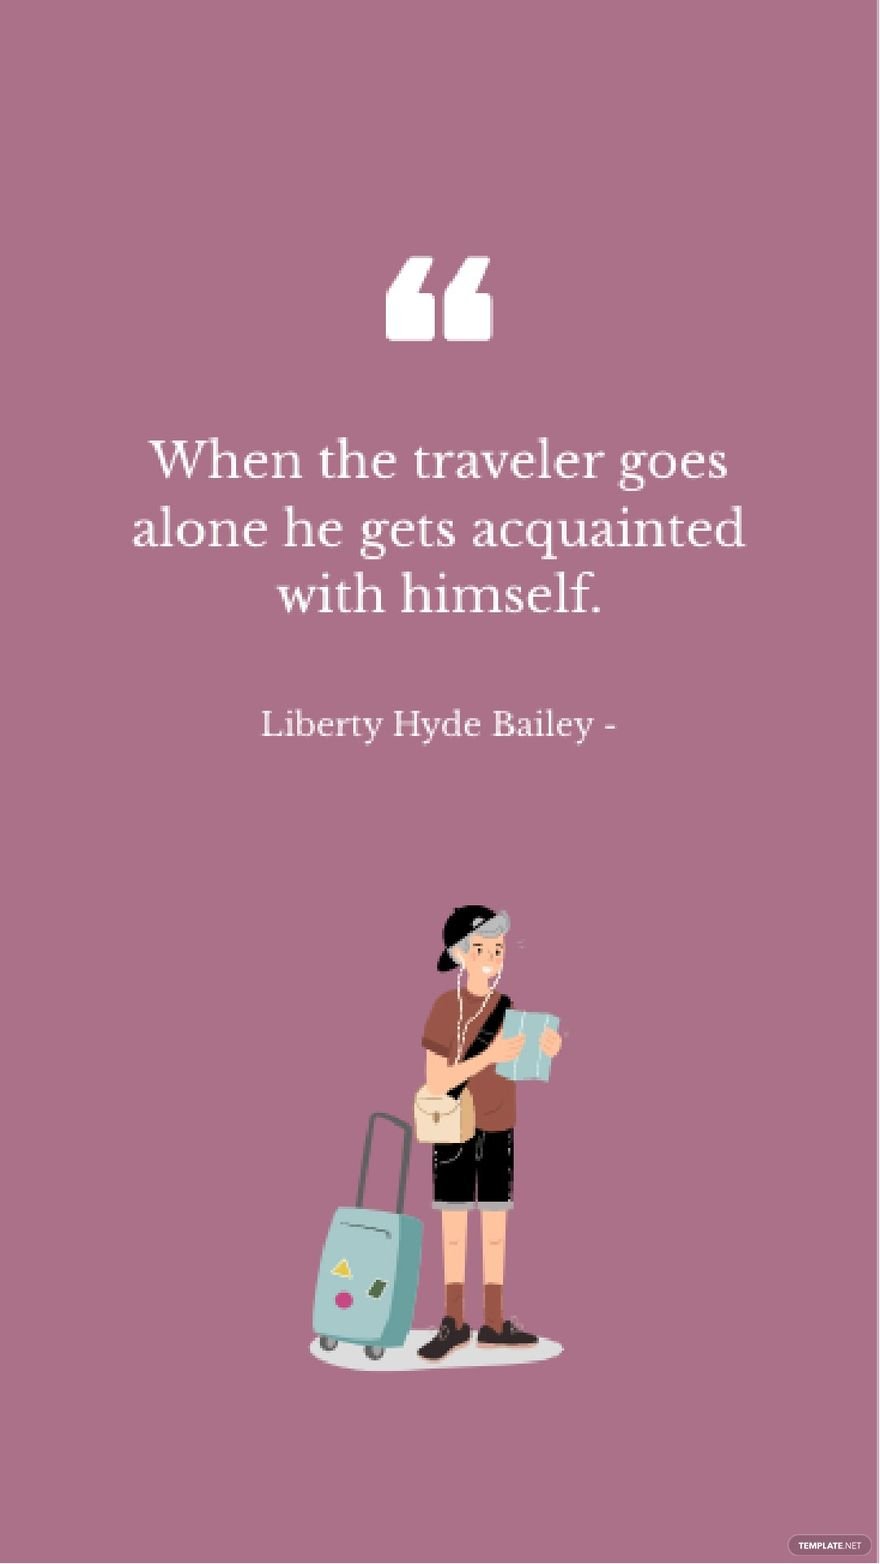 Free Liberty Hyde Bailey - When the traveler goes alone he gets acquainted with himself.